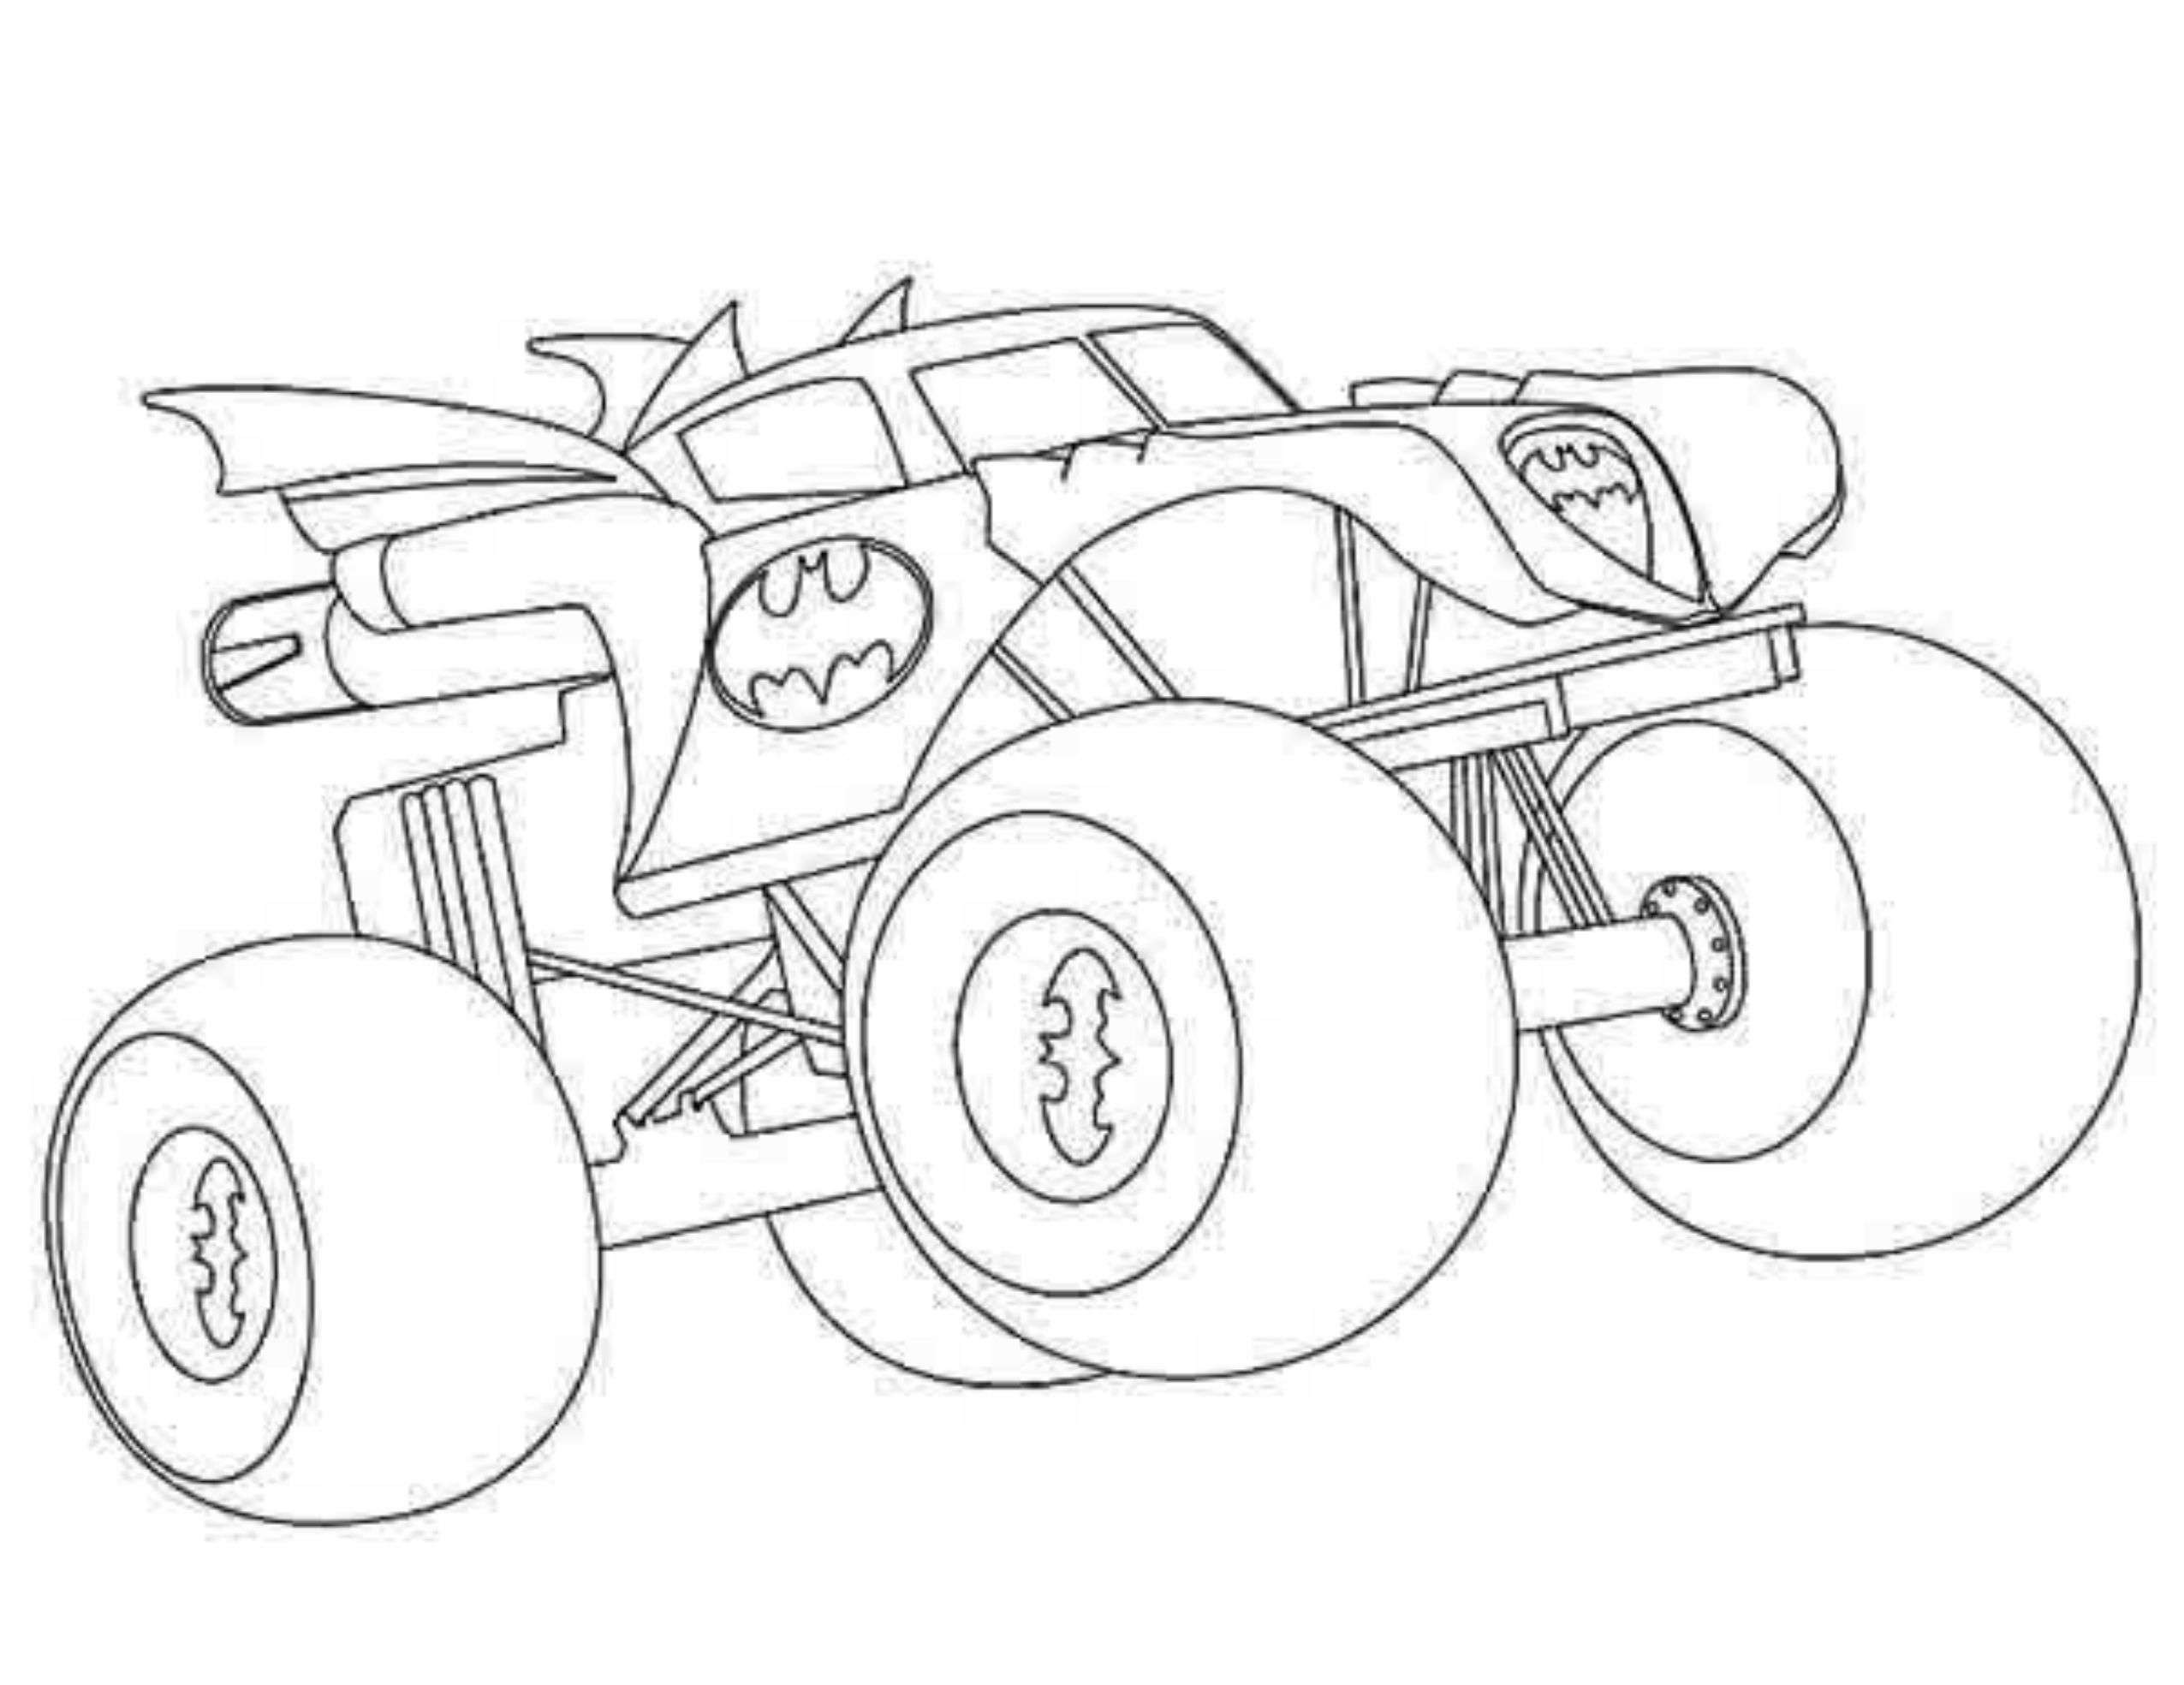 Coloring Pages For Big Kids
 Drawing Monster Truck Coloring Pages with Kids